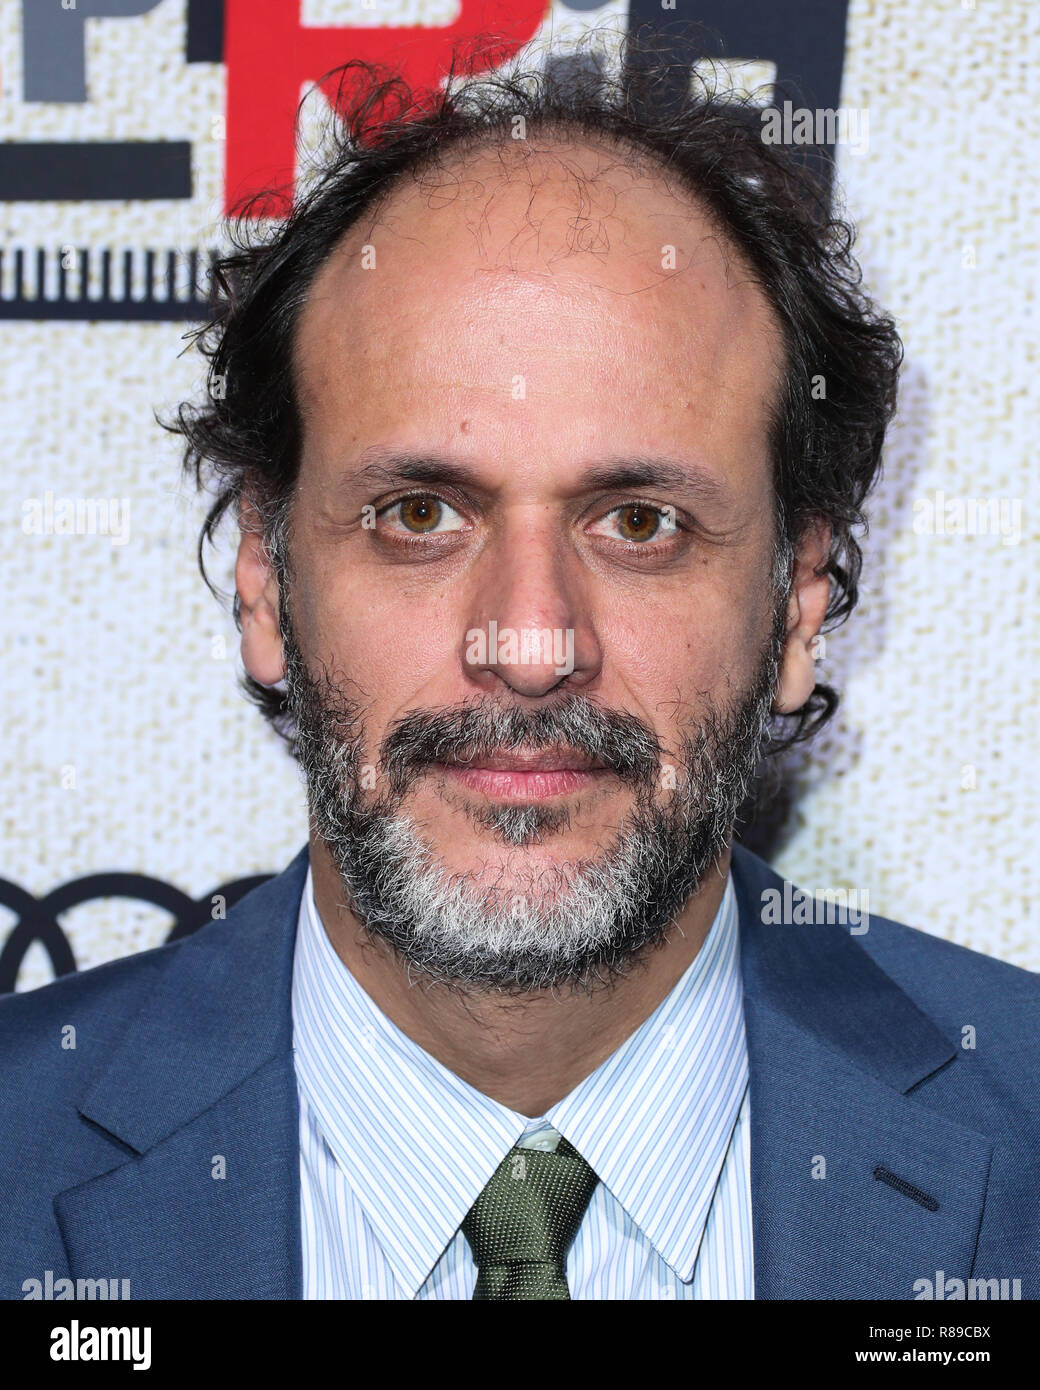 HOLLYWOOD, LOS ANGELES, CA, USA - OCTOBER 24: Director Luca Guadagnino arrives at the Los Angeles Premiere Of Amazon Studio's 'Suspiria' held at the ArcLight Cinerama Dome on October 24, 2018 in Hollywood, Los Angeles, California, United States. (Photo by Xavier Collin/Image Press Agency) Stock Photo